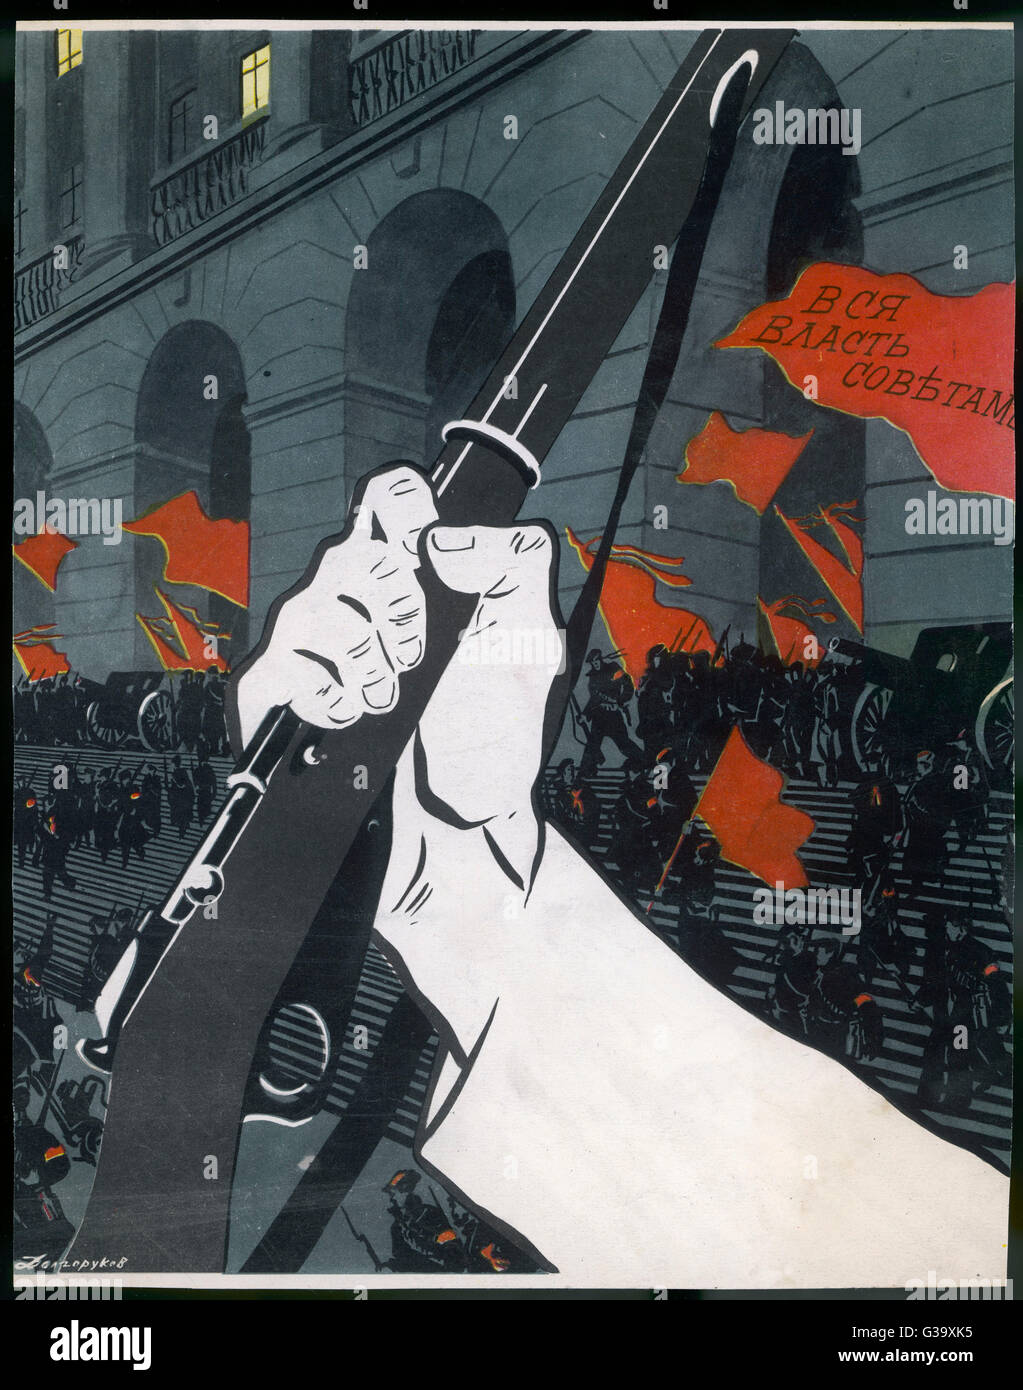 Communist poster - gun and red flags - Russian Revolution Stock Photo